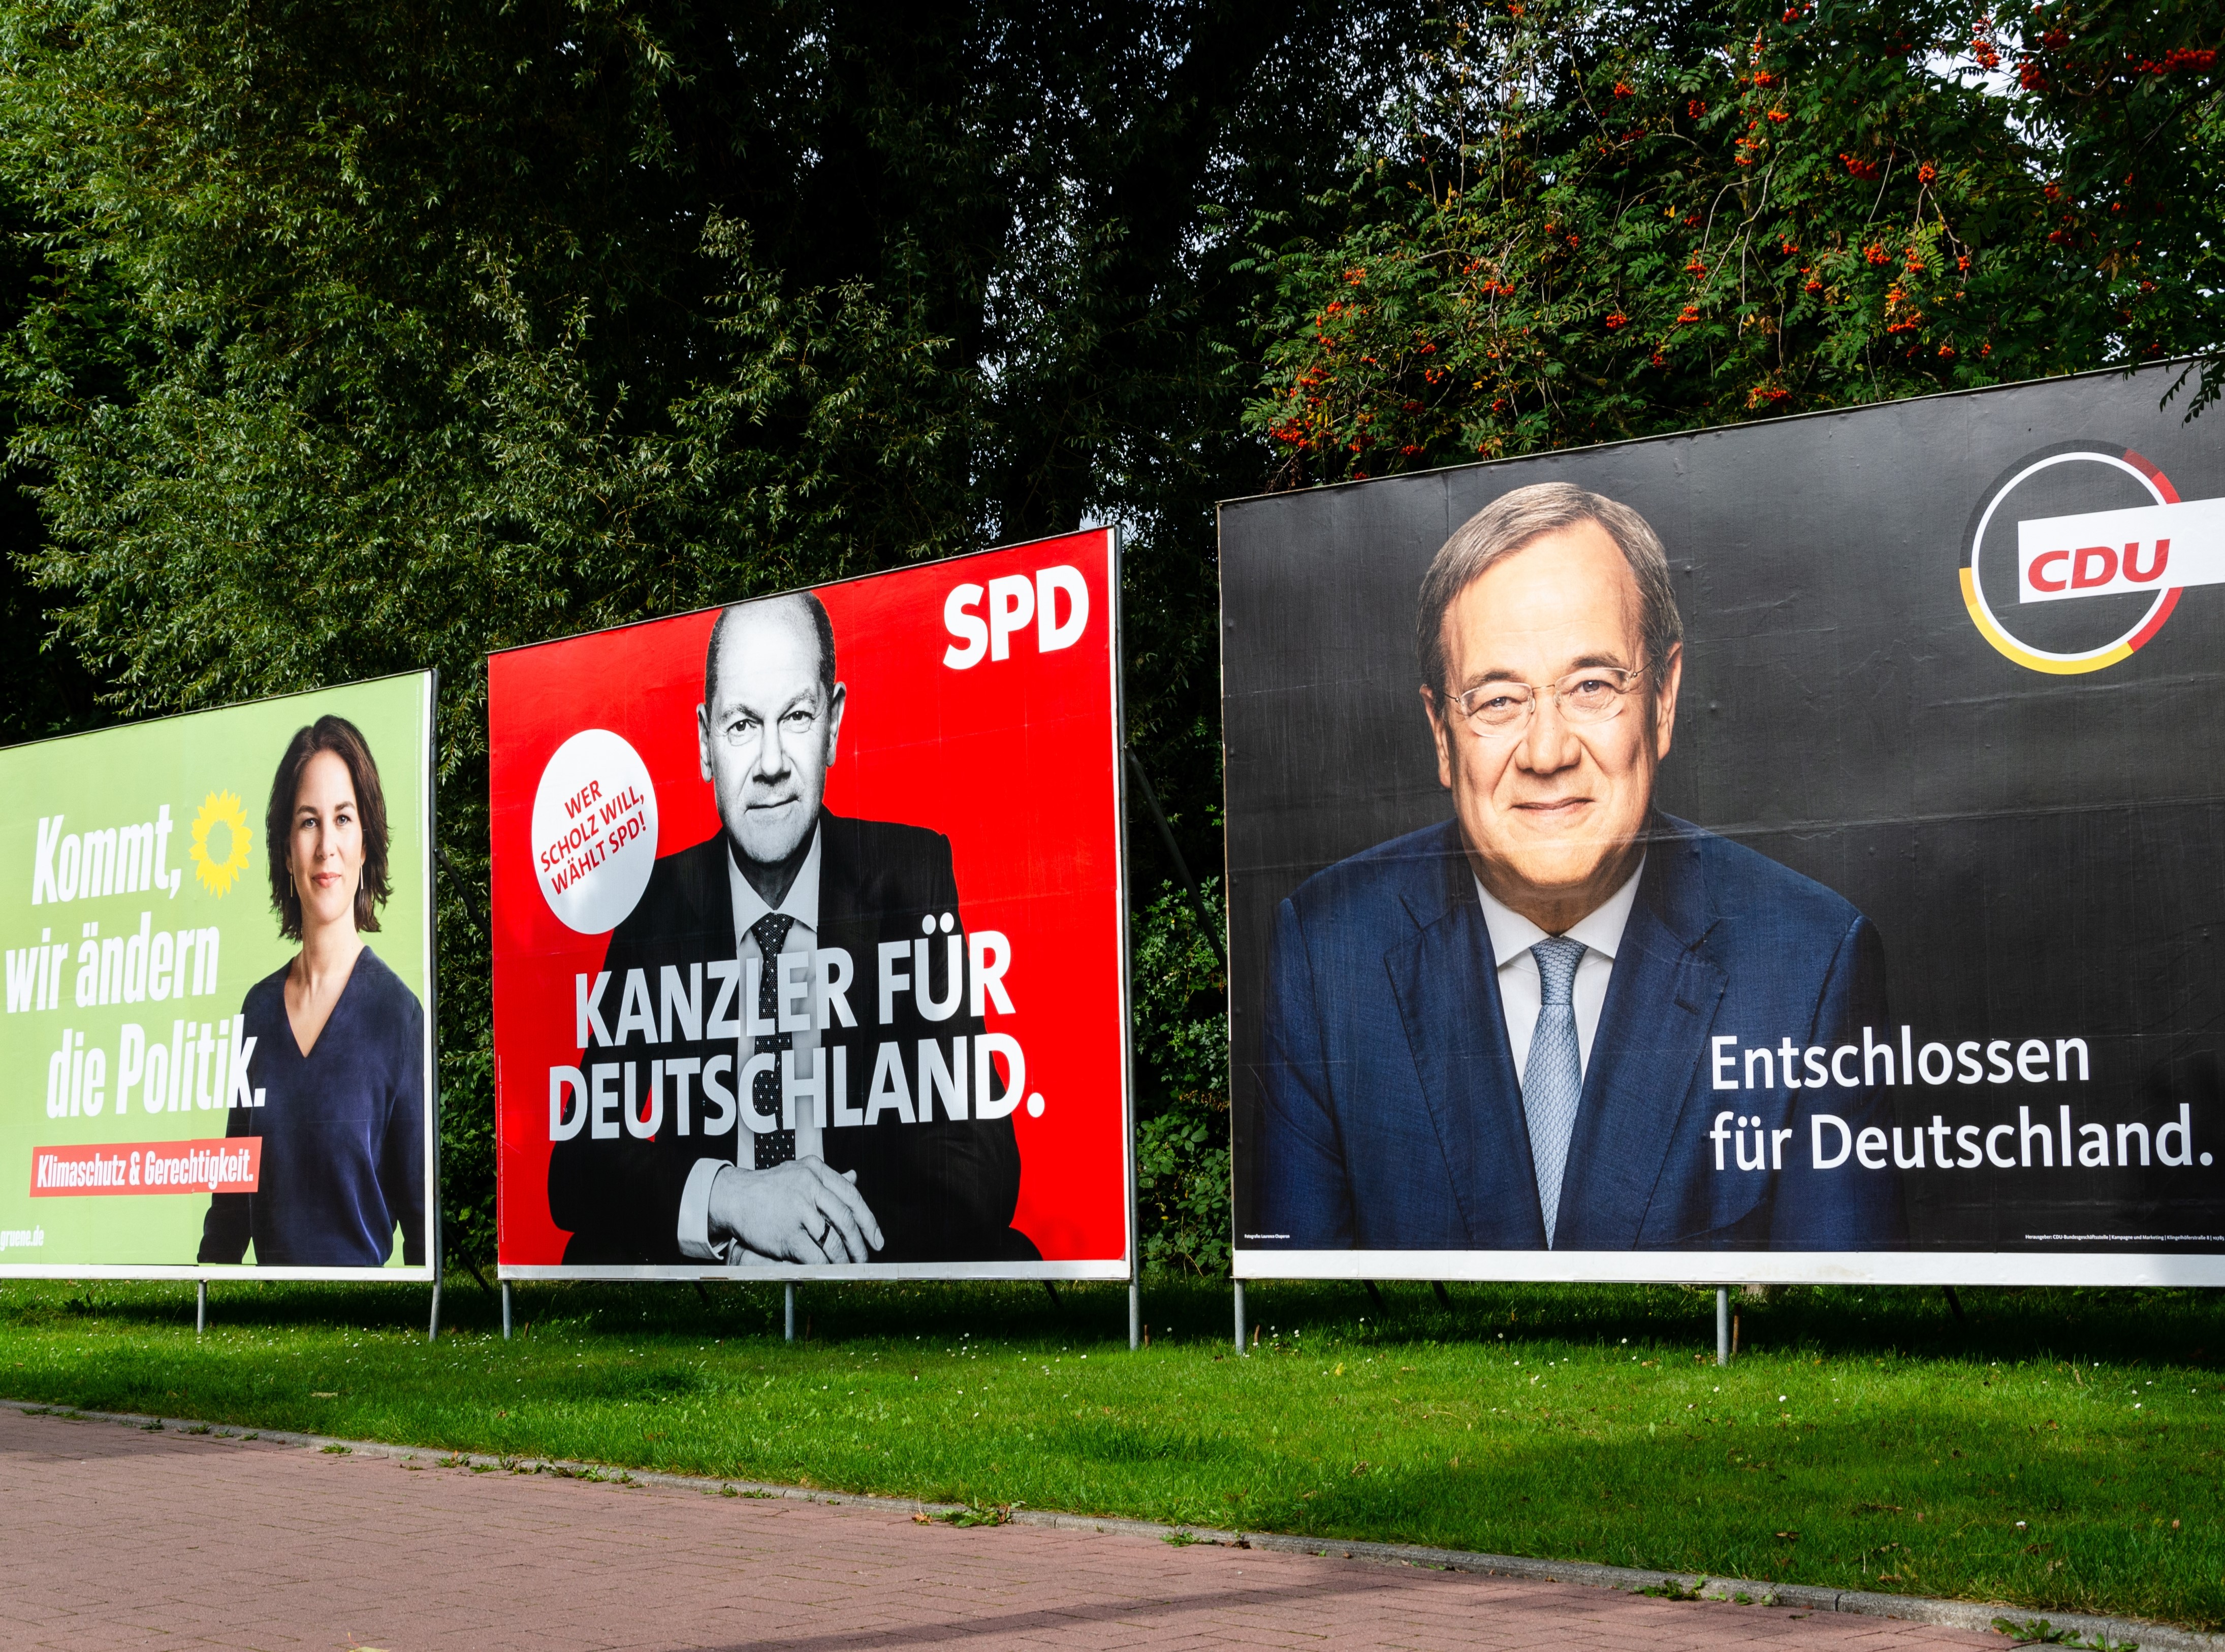 Soest, Germany - September 12, 2021: Election campaign posters of German political parties